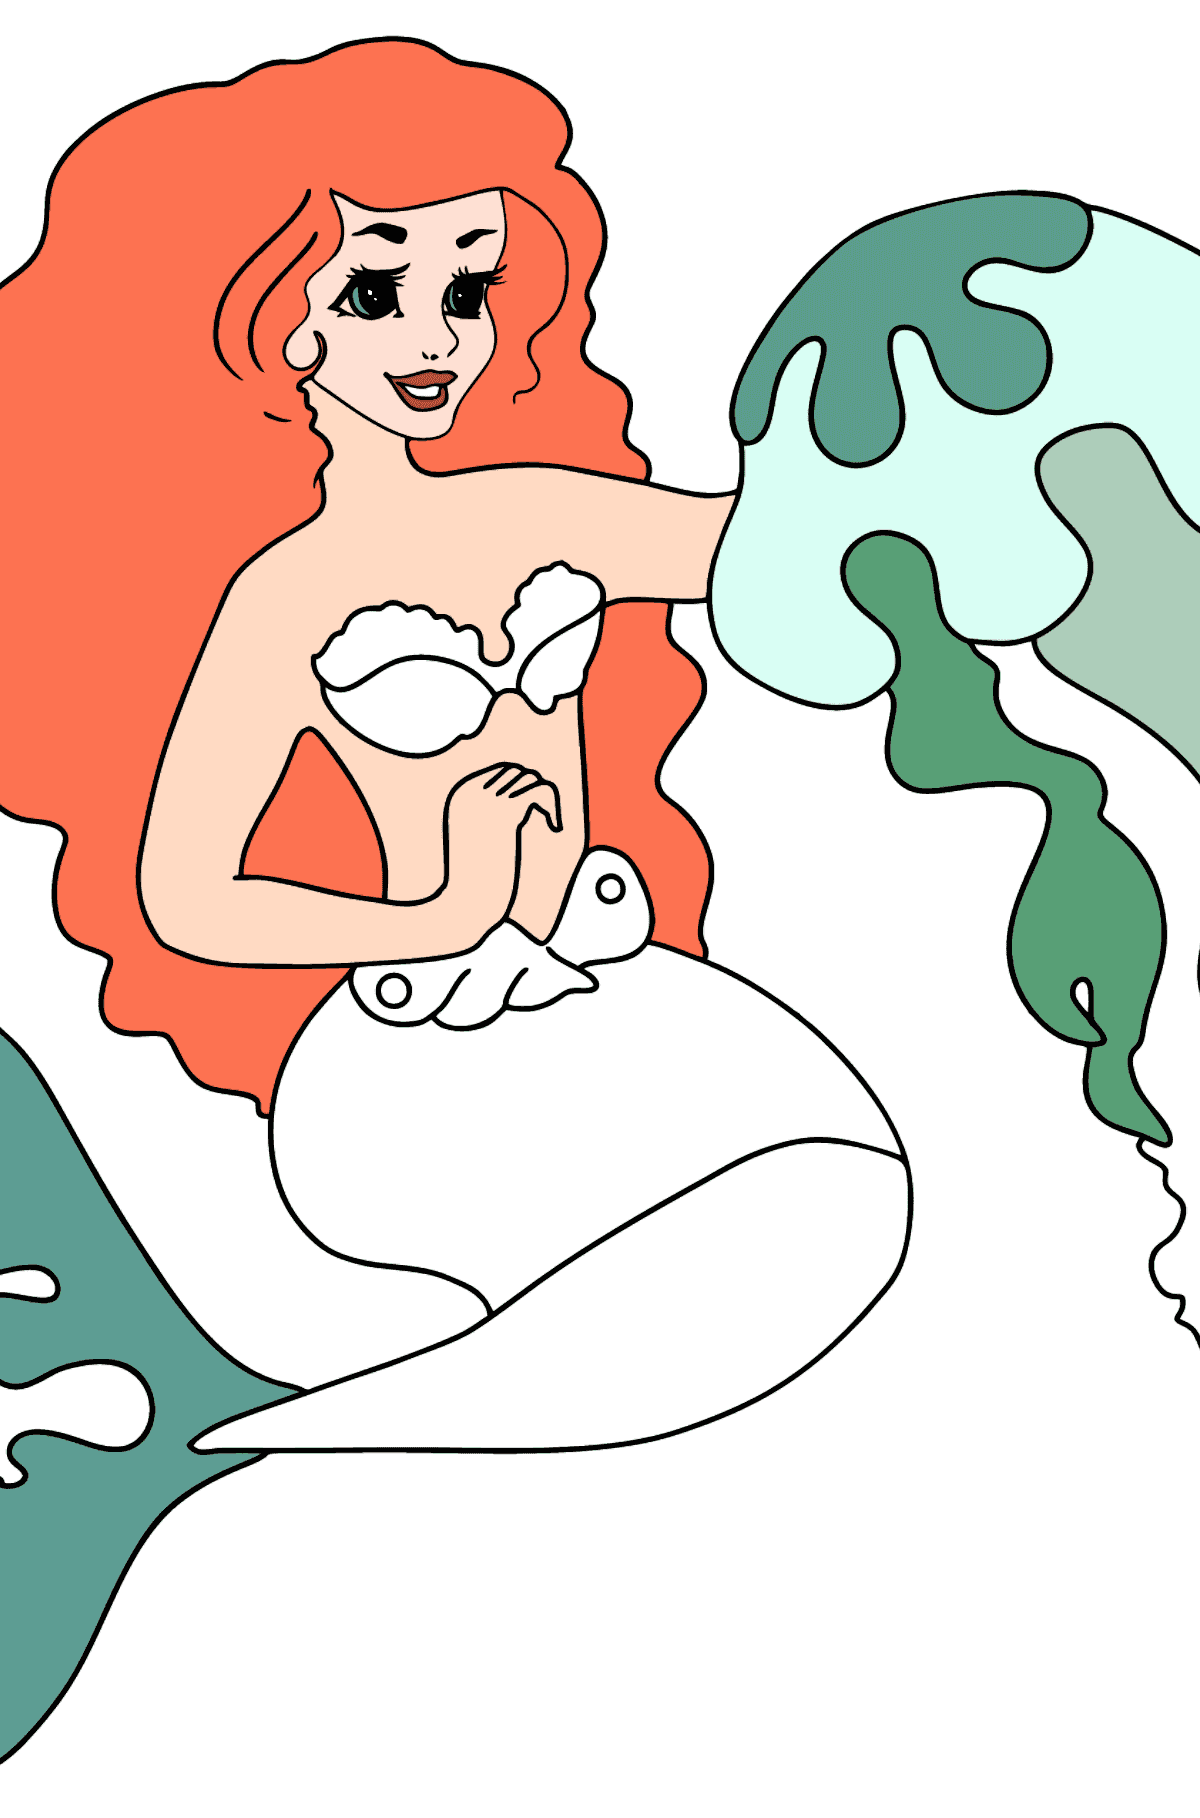 Coloring Page Mermaid and Medusa - Coloring Pages for Kids